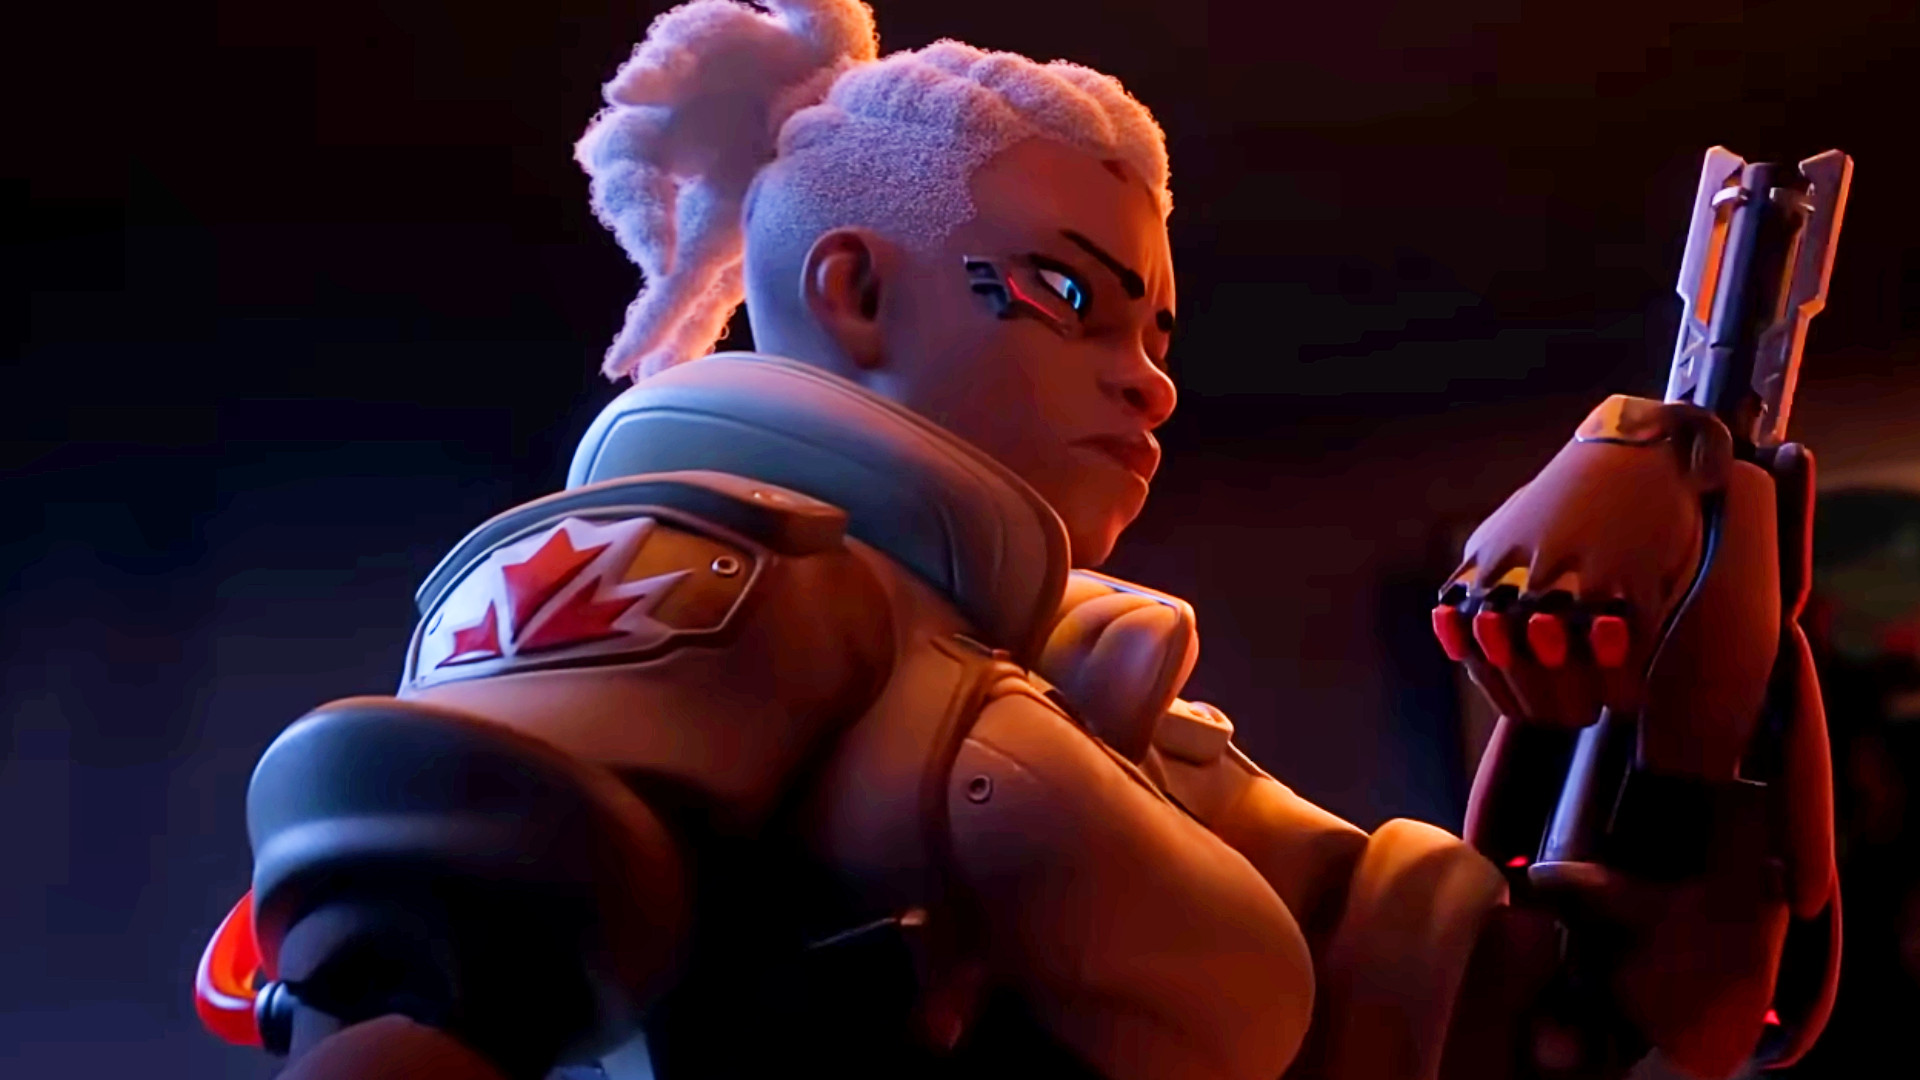 Overwatch 2 pros convince fans Sojourn is most OP character